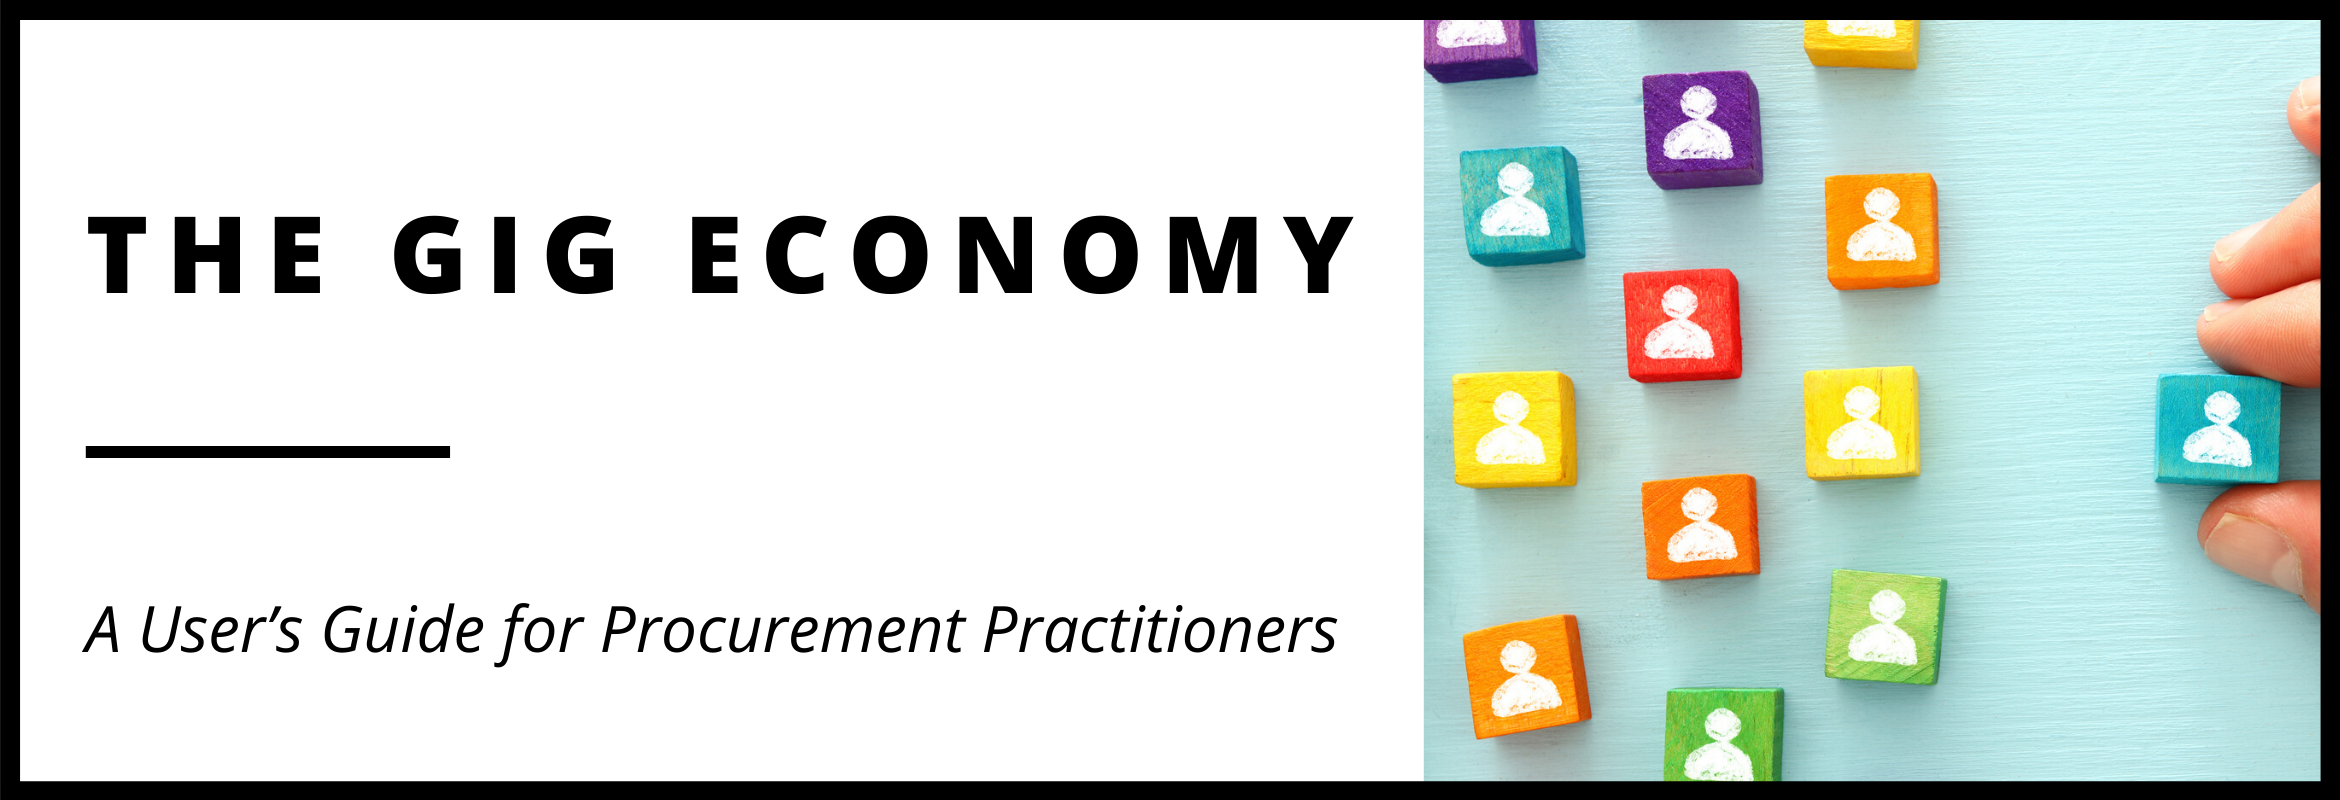 How procurement can make the gig economy work for them. 